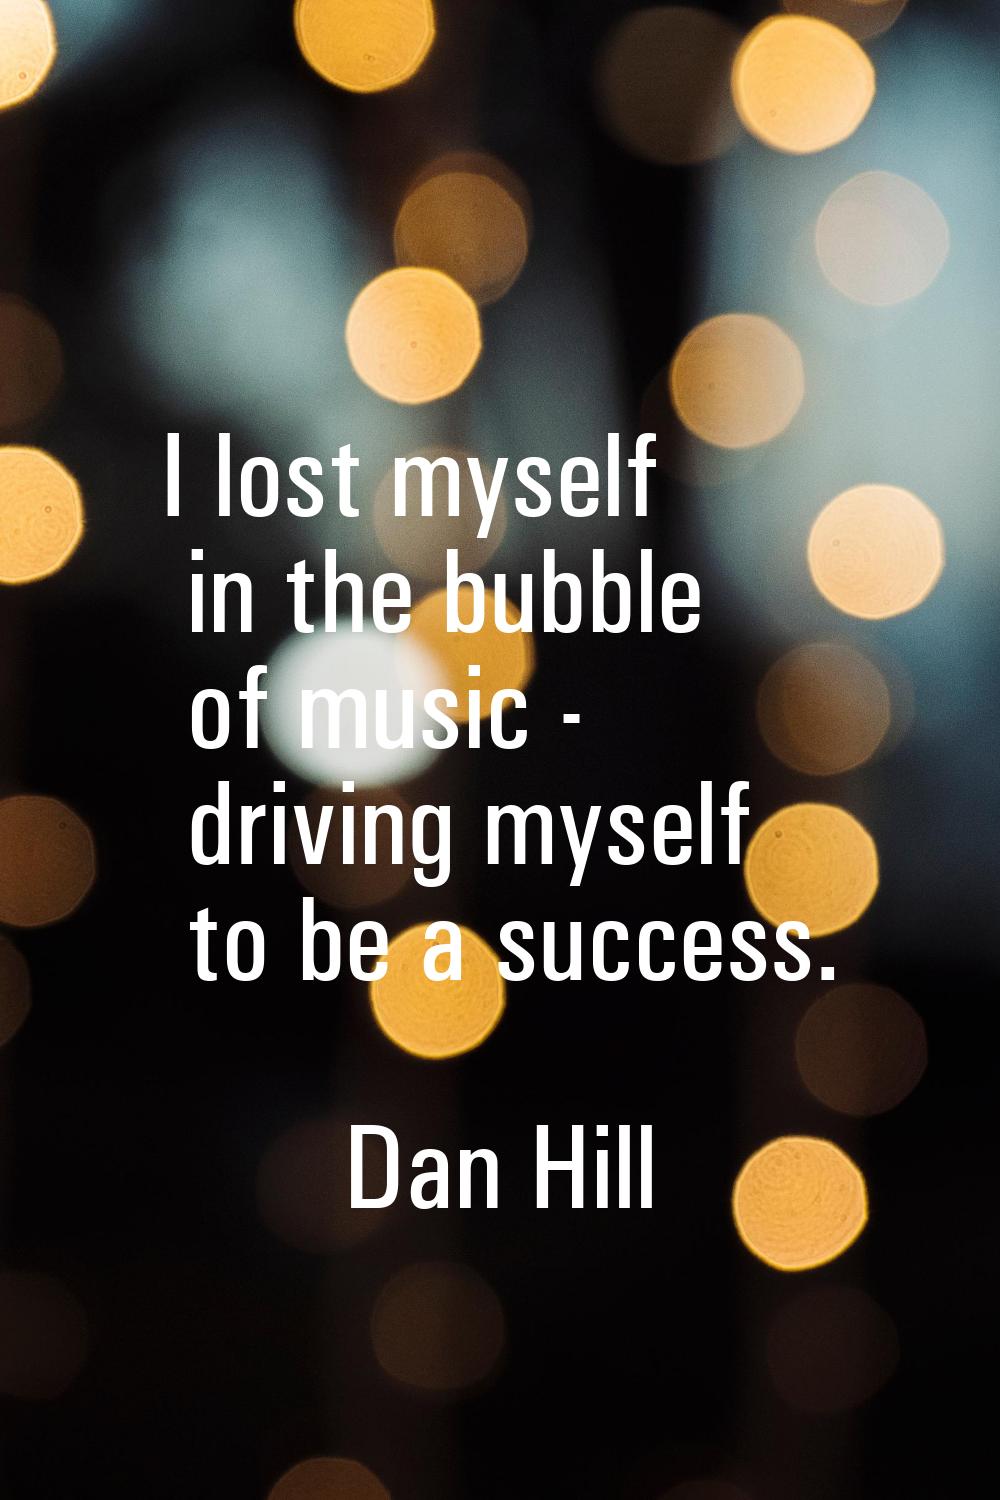 I lost myself in the bubble of music - driving myself to be a success.